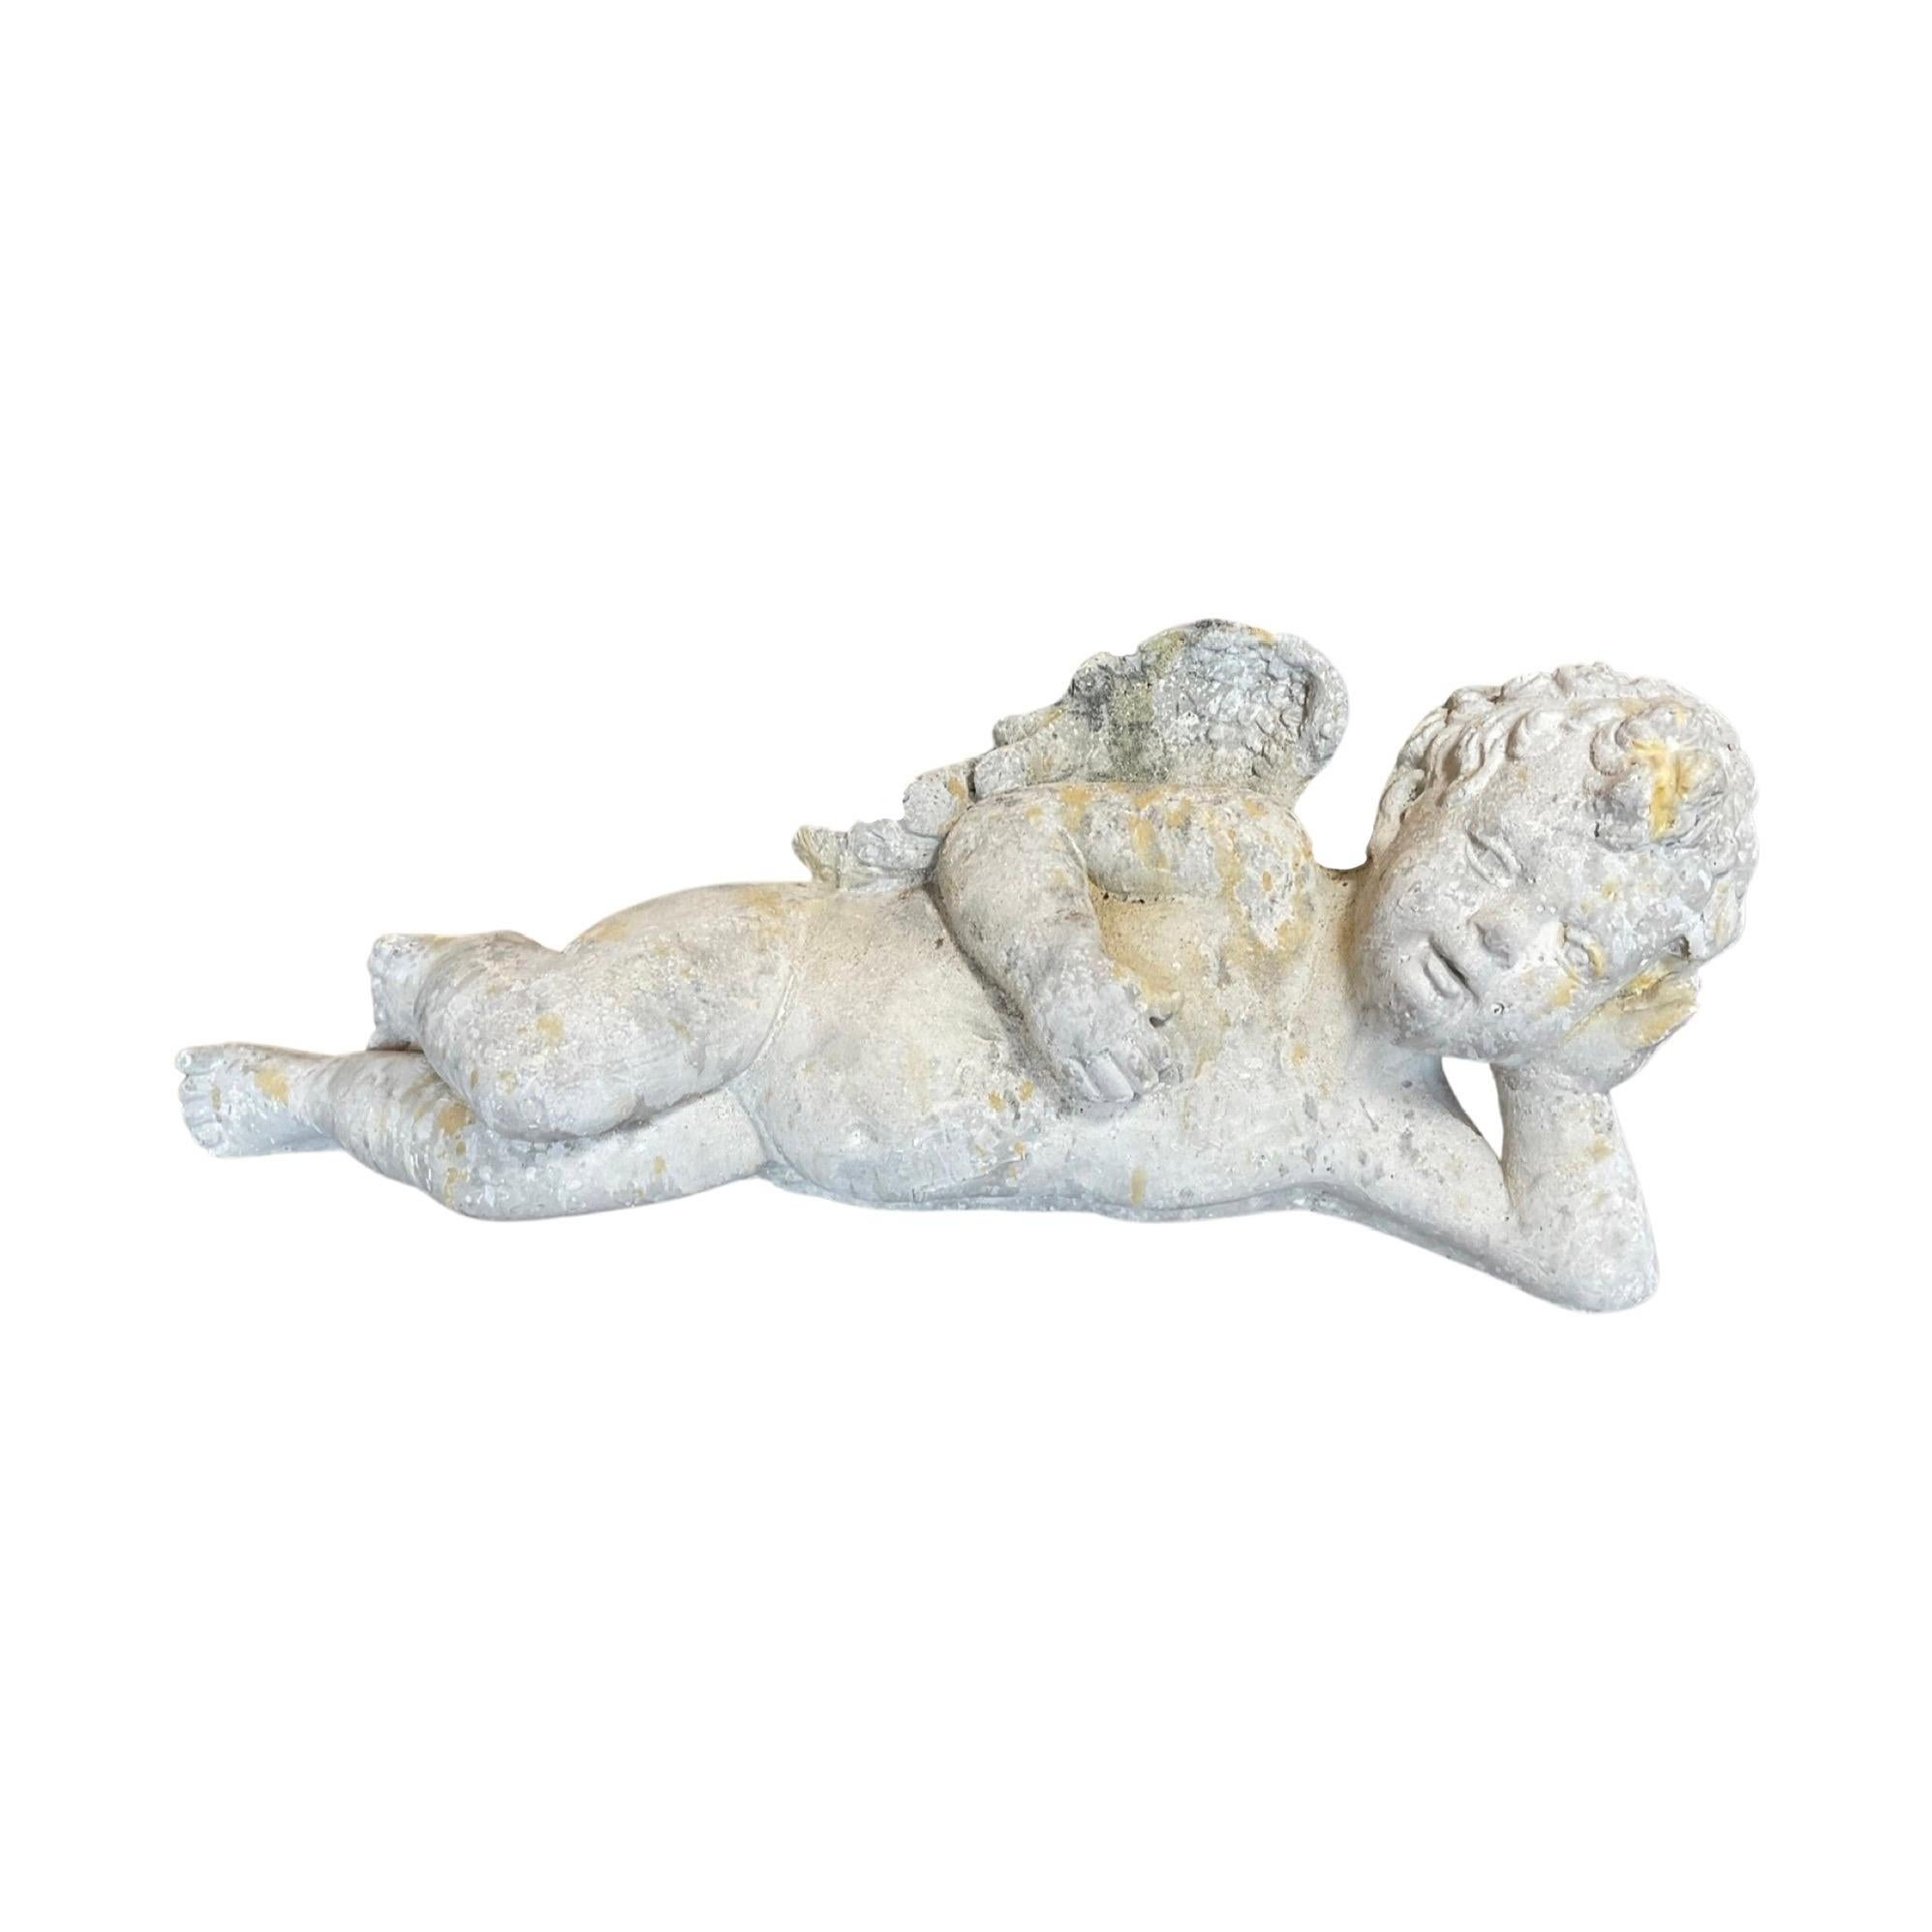 Crafted from limestone composite, this French cherub exudes delicate beauty and timeless elegance. Small in size, it rests peacefully on its side, adding a touch of grace to any contemporary setting. Bring a touch of France to your home with this